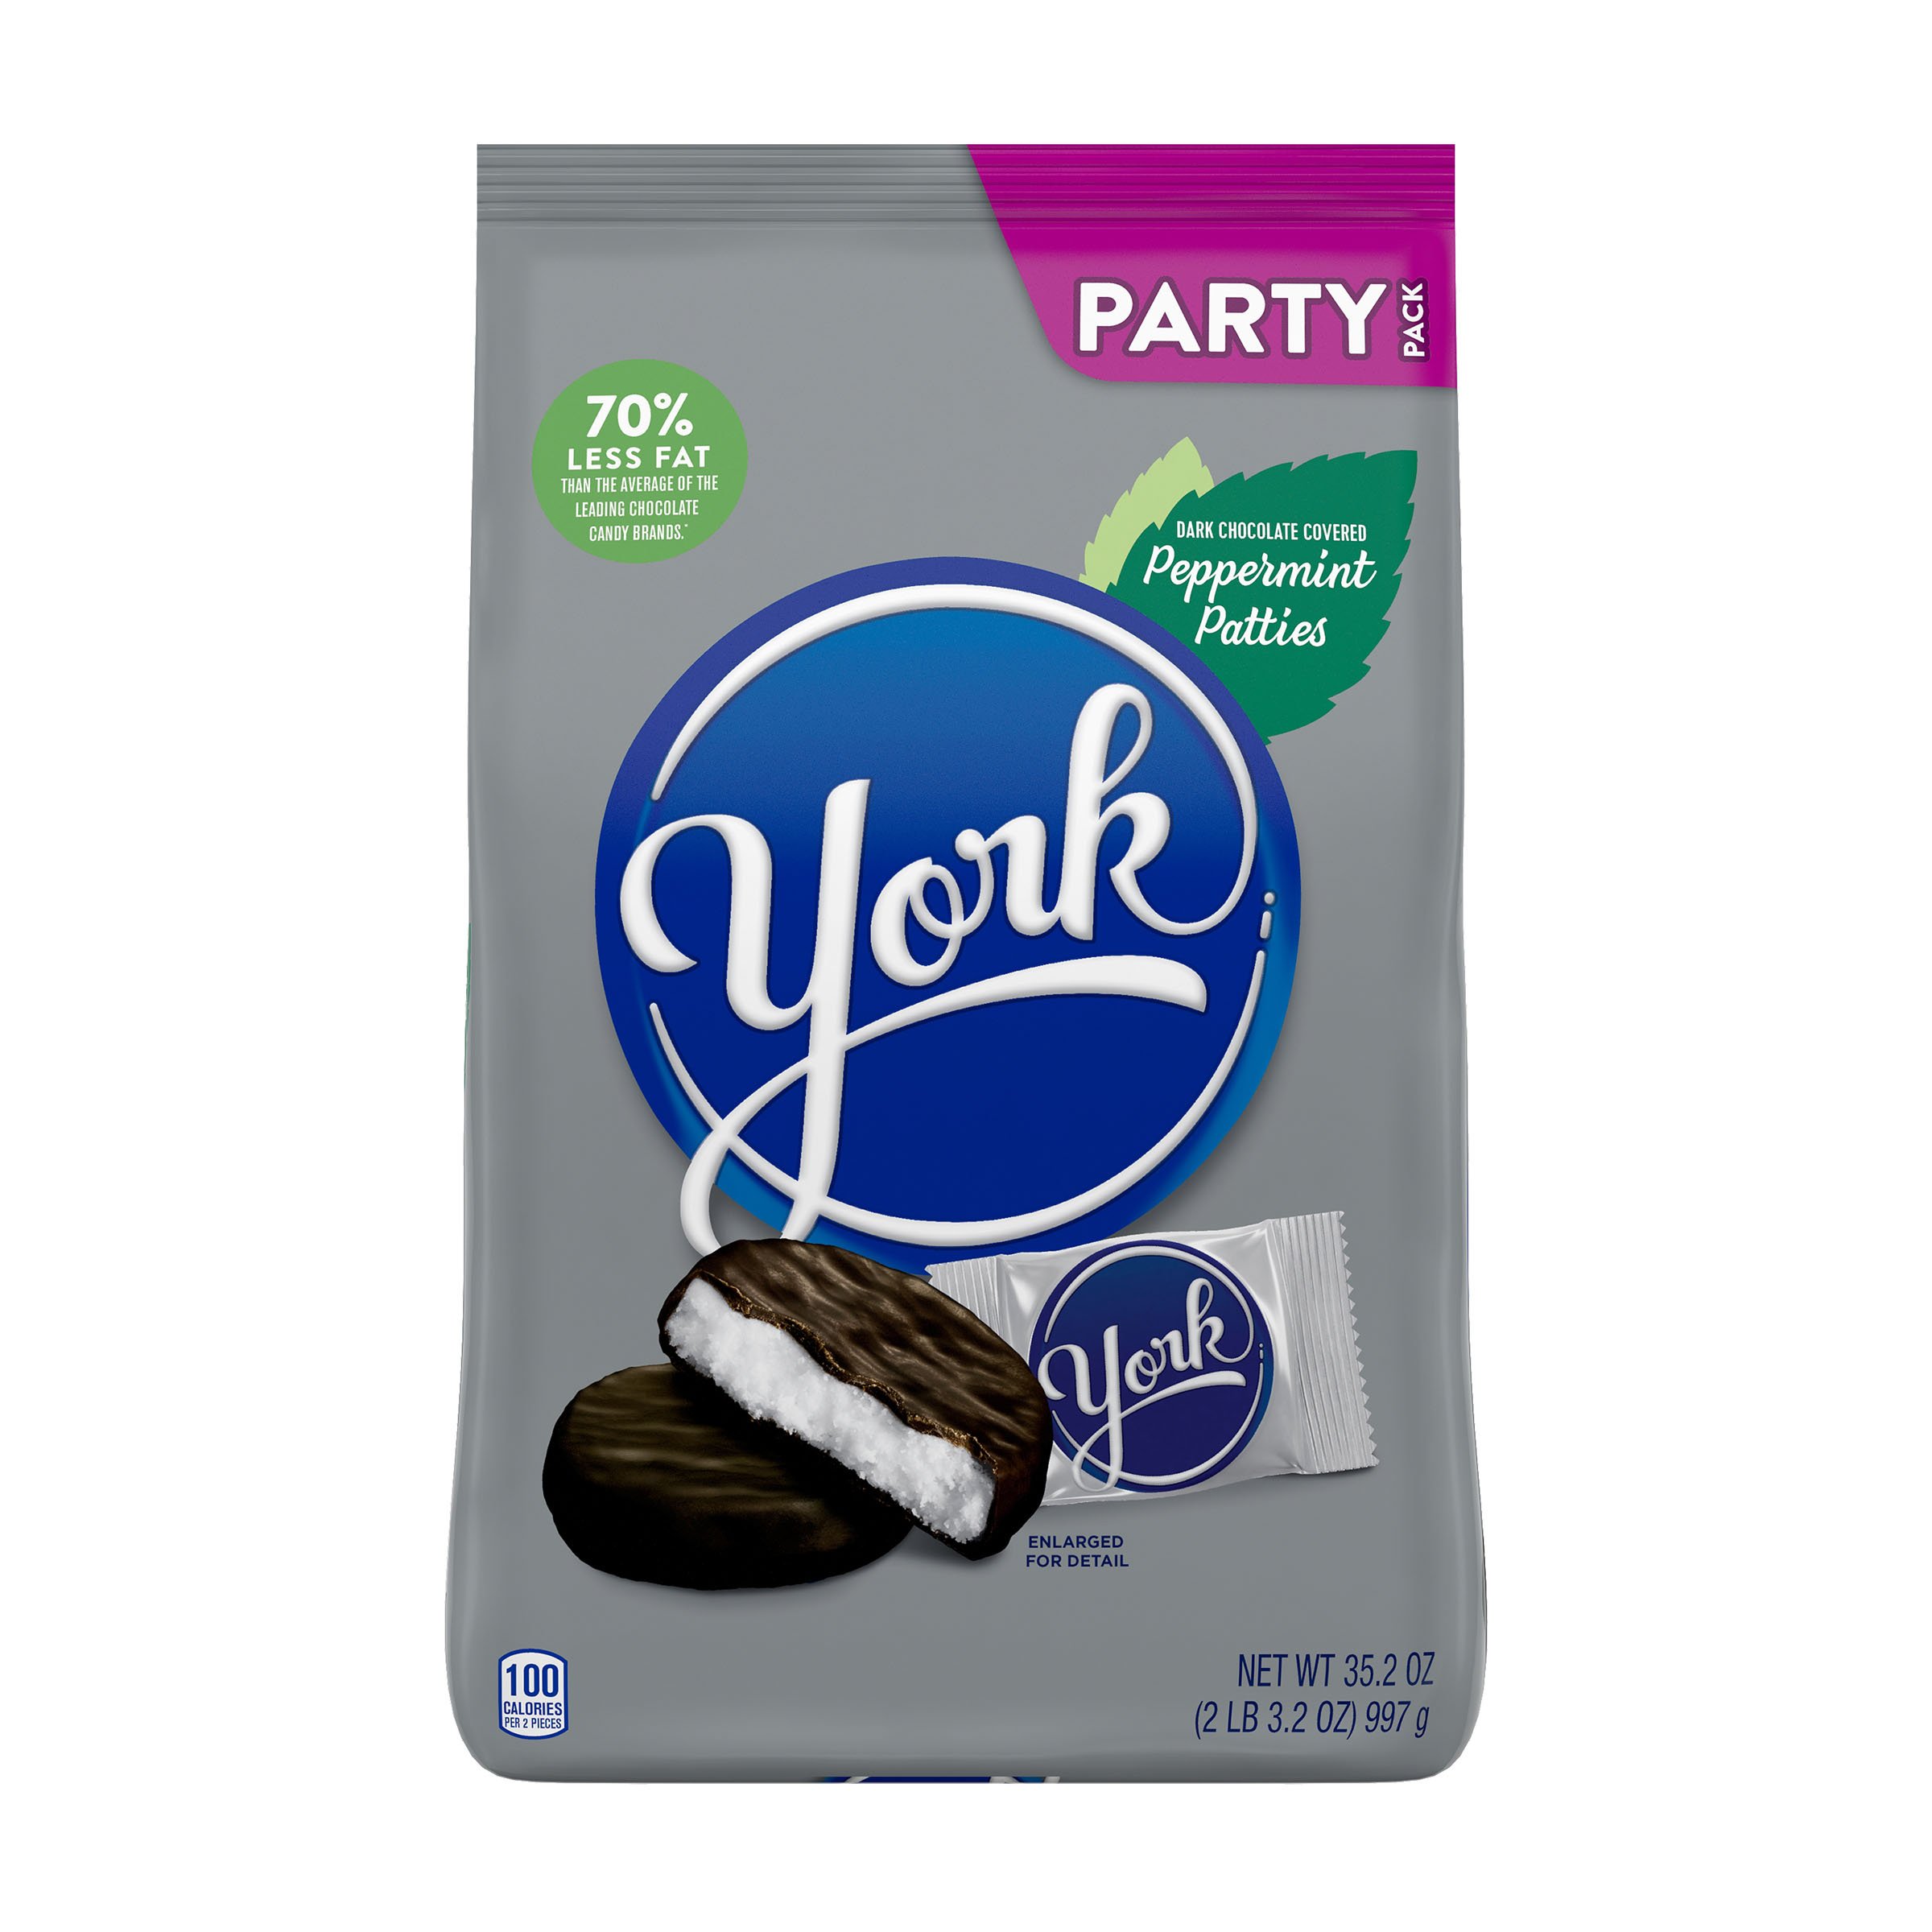 York Dark Chocolate Peppermint Patties Candy Party Pack Shop Candy At H E B